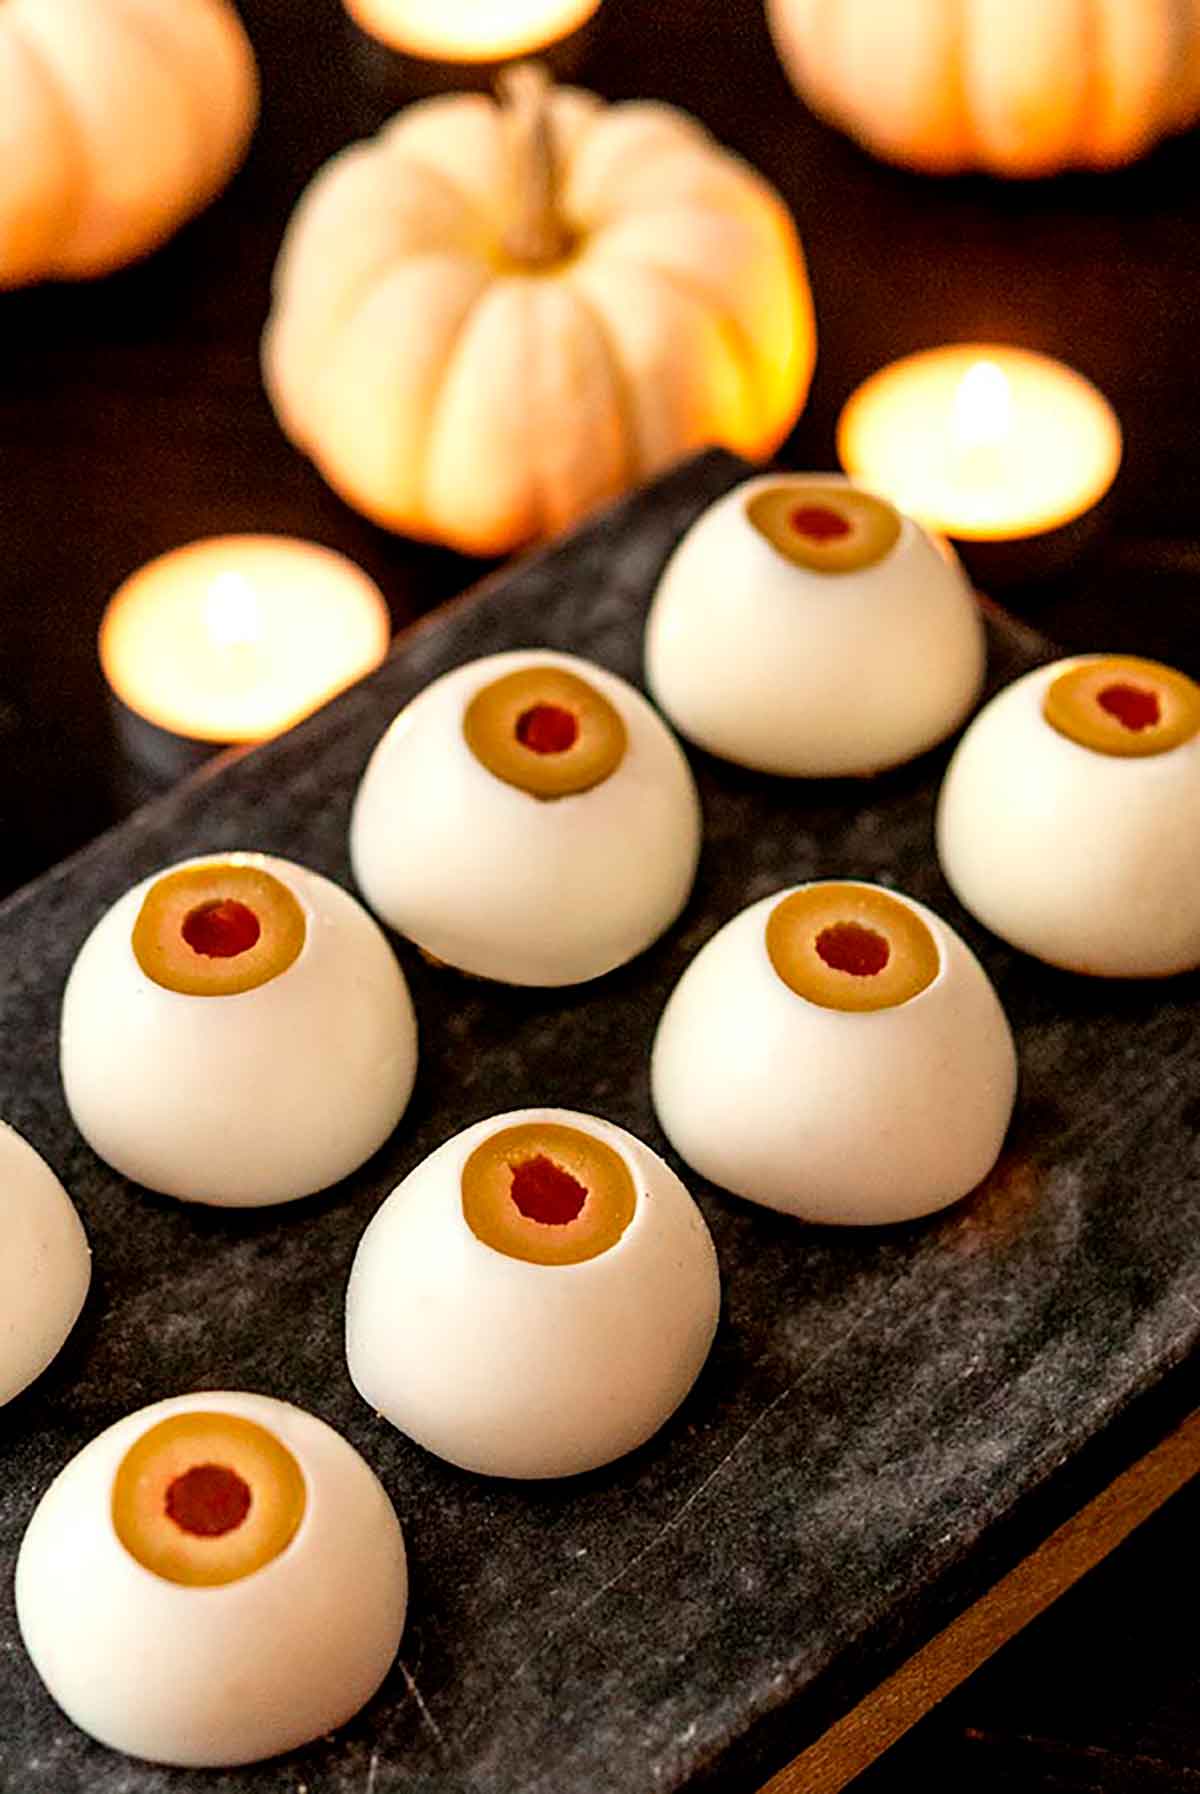 8 upside-down deviled eggs that look like eyeballs on a slate in front of candles and white pumpkins.